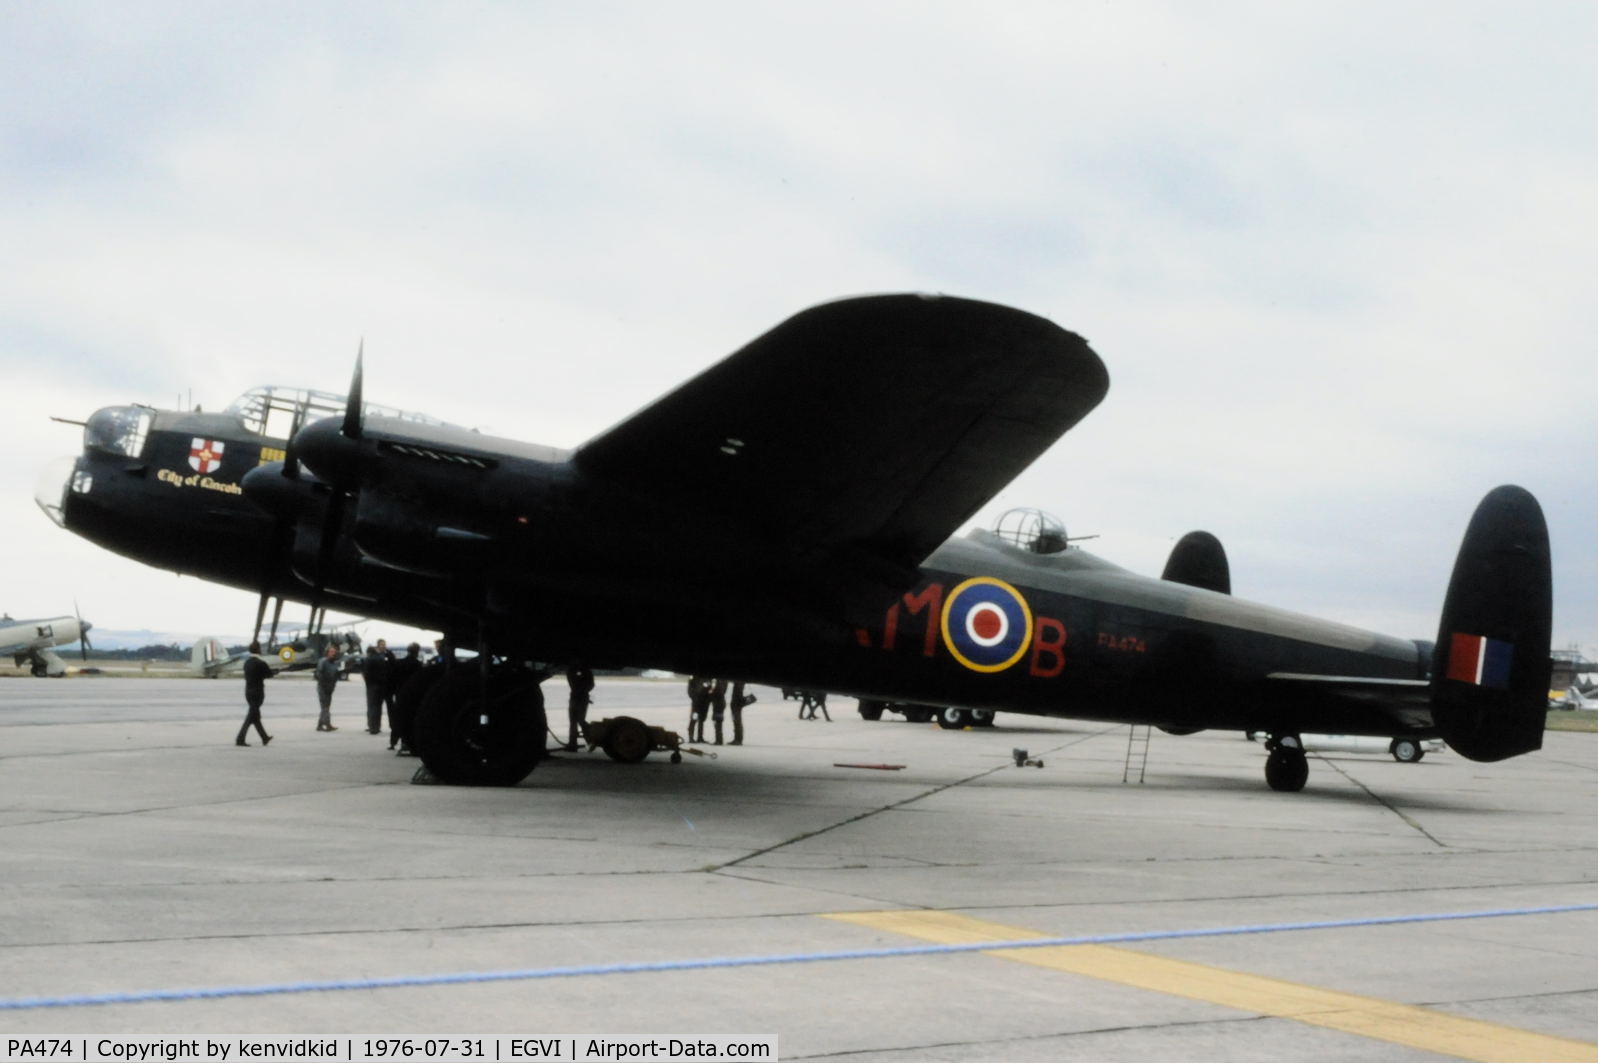 PA474, 1945 Avro 683 Lancaster B1 C/N VACH0052/D2973, At the 1976 International Air Tattoo Greenham Common, copied from slide.